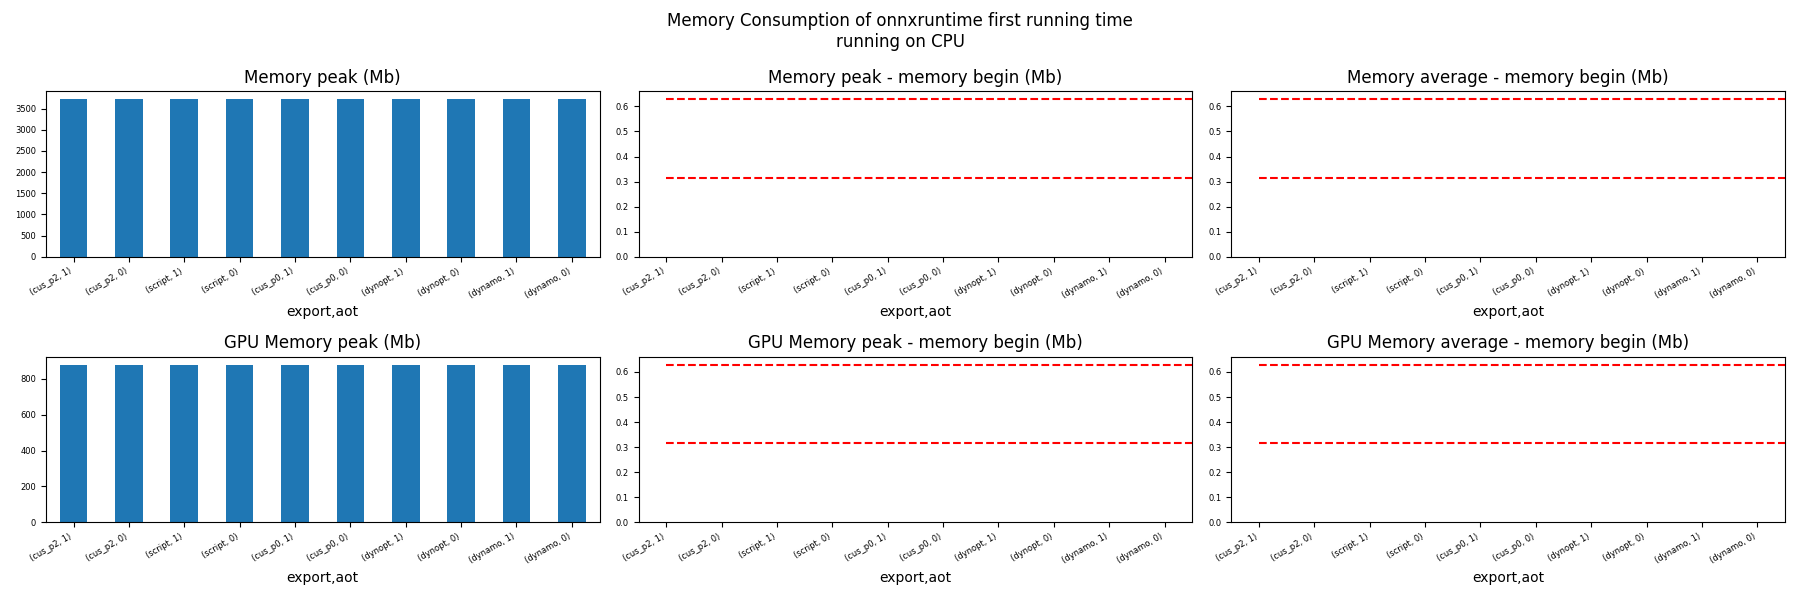 Memory Consumption of onnxruntime first running time running on CPU, Memory peak (Mb), Memory peak - memory begin (Mb), Memory average - memory begin (Mb), GPU Memory peak (Mb), GPU Memory peak - memory begin (Mb), GPU Memory average - memory begin (Mb)